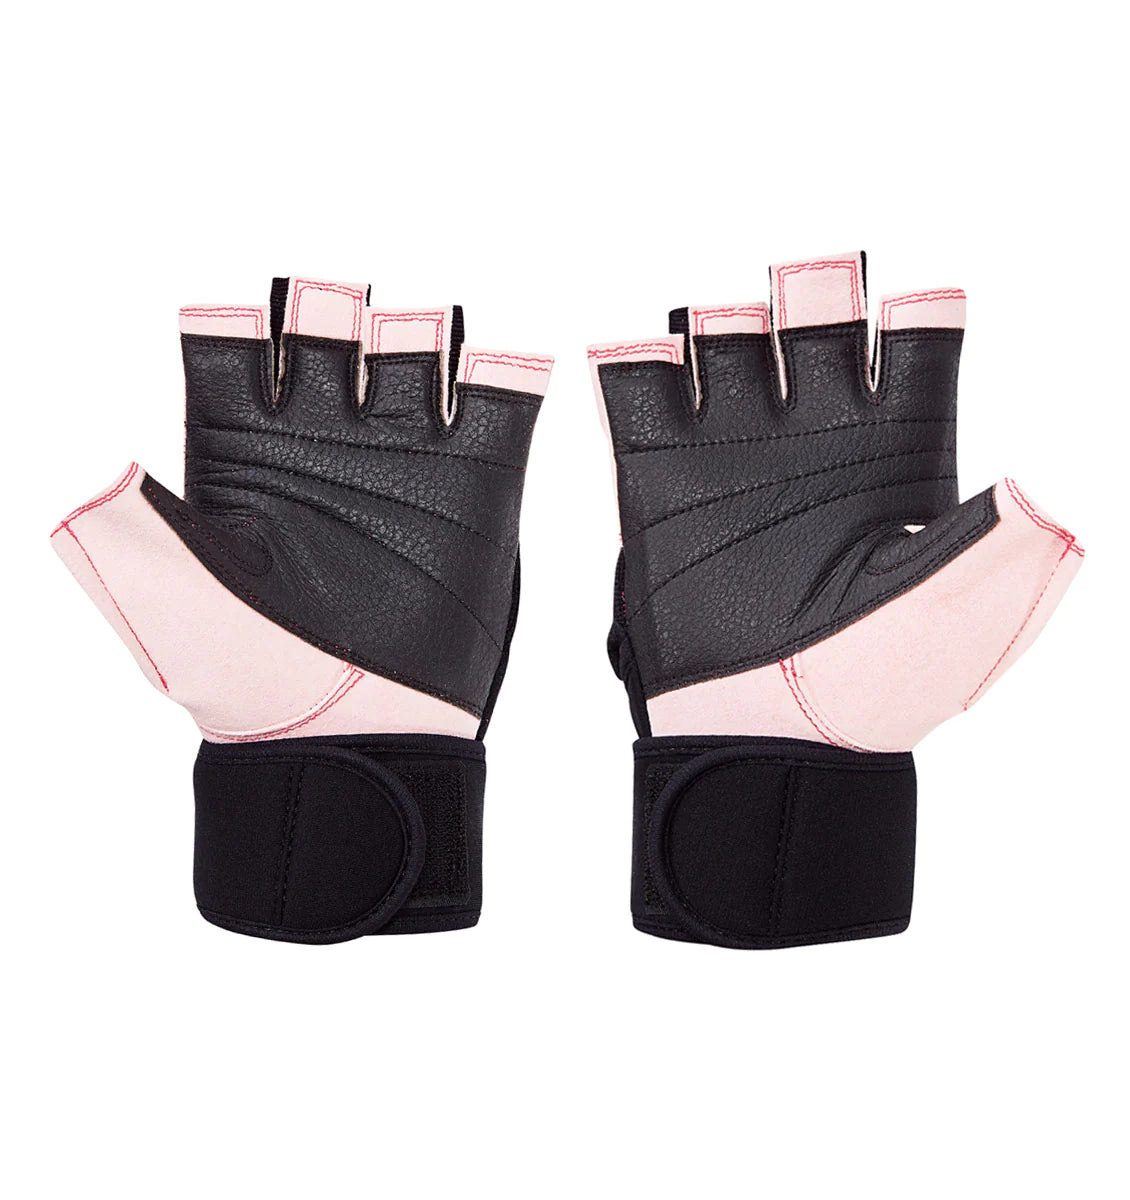 SCHEIK PINK PLATINUM SERIES LIFTING GLOVES WITH WRIST WRAPS | FITNESS EXPERIENCE